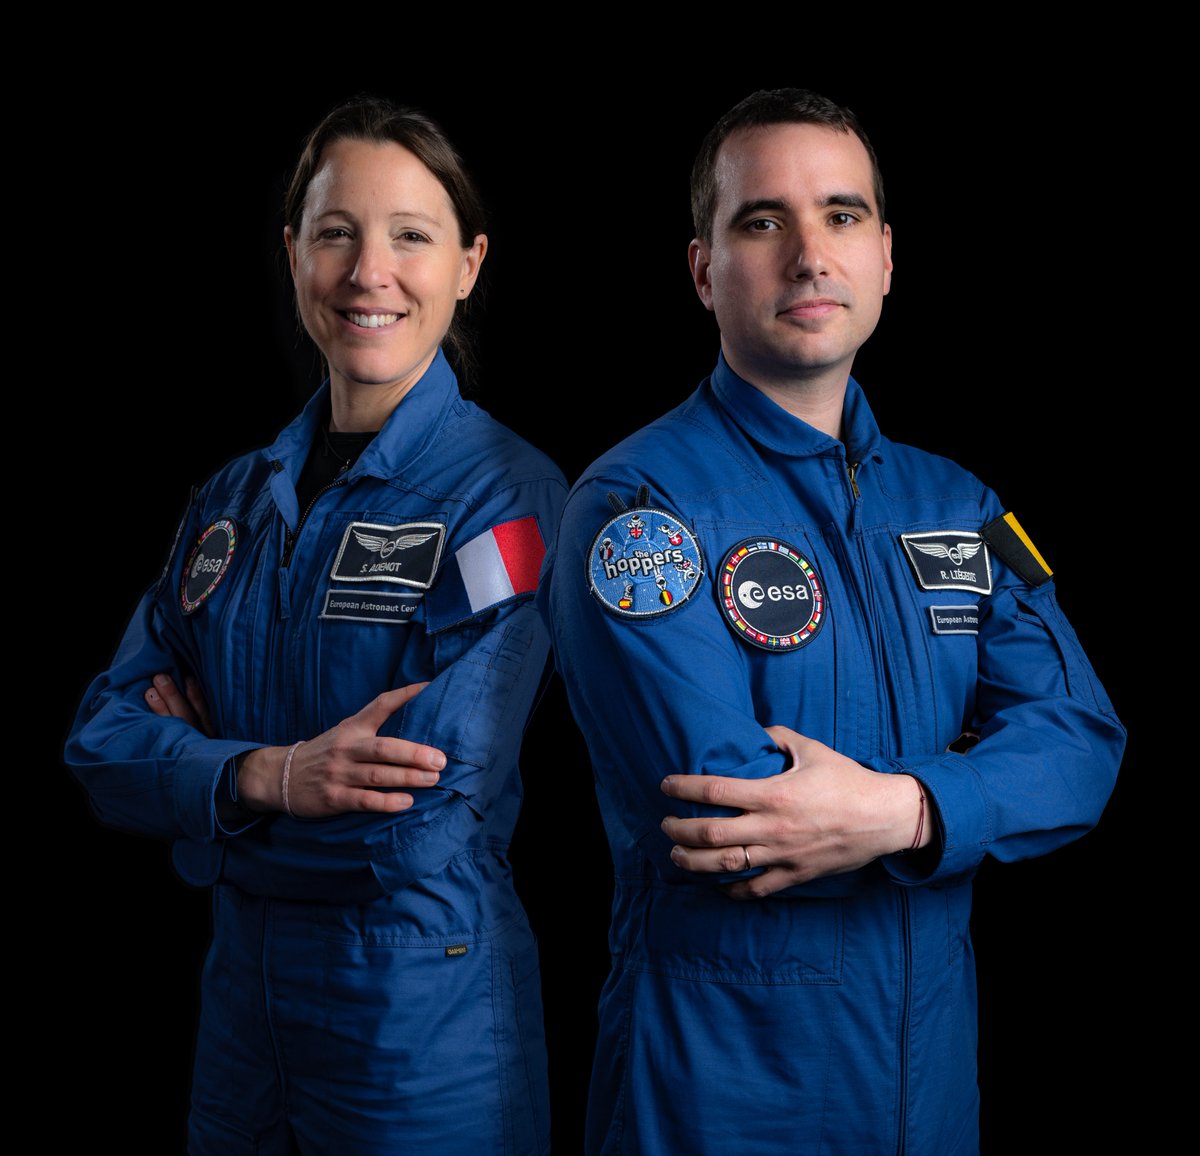 Nothing quite beats that feeling of being assigned to a space mission! Congratulations to @Soph_astro & @Raph_Astro, who recently graduated from @esa's astronaut class of 2022 and will fly to the @Space_Station in 2026 🚀 #SpaceExploration #esa @esaspaceflight